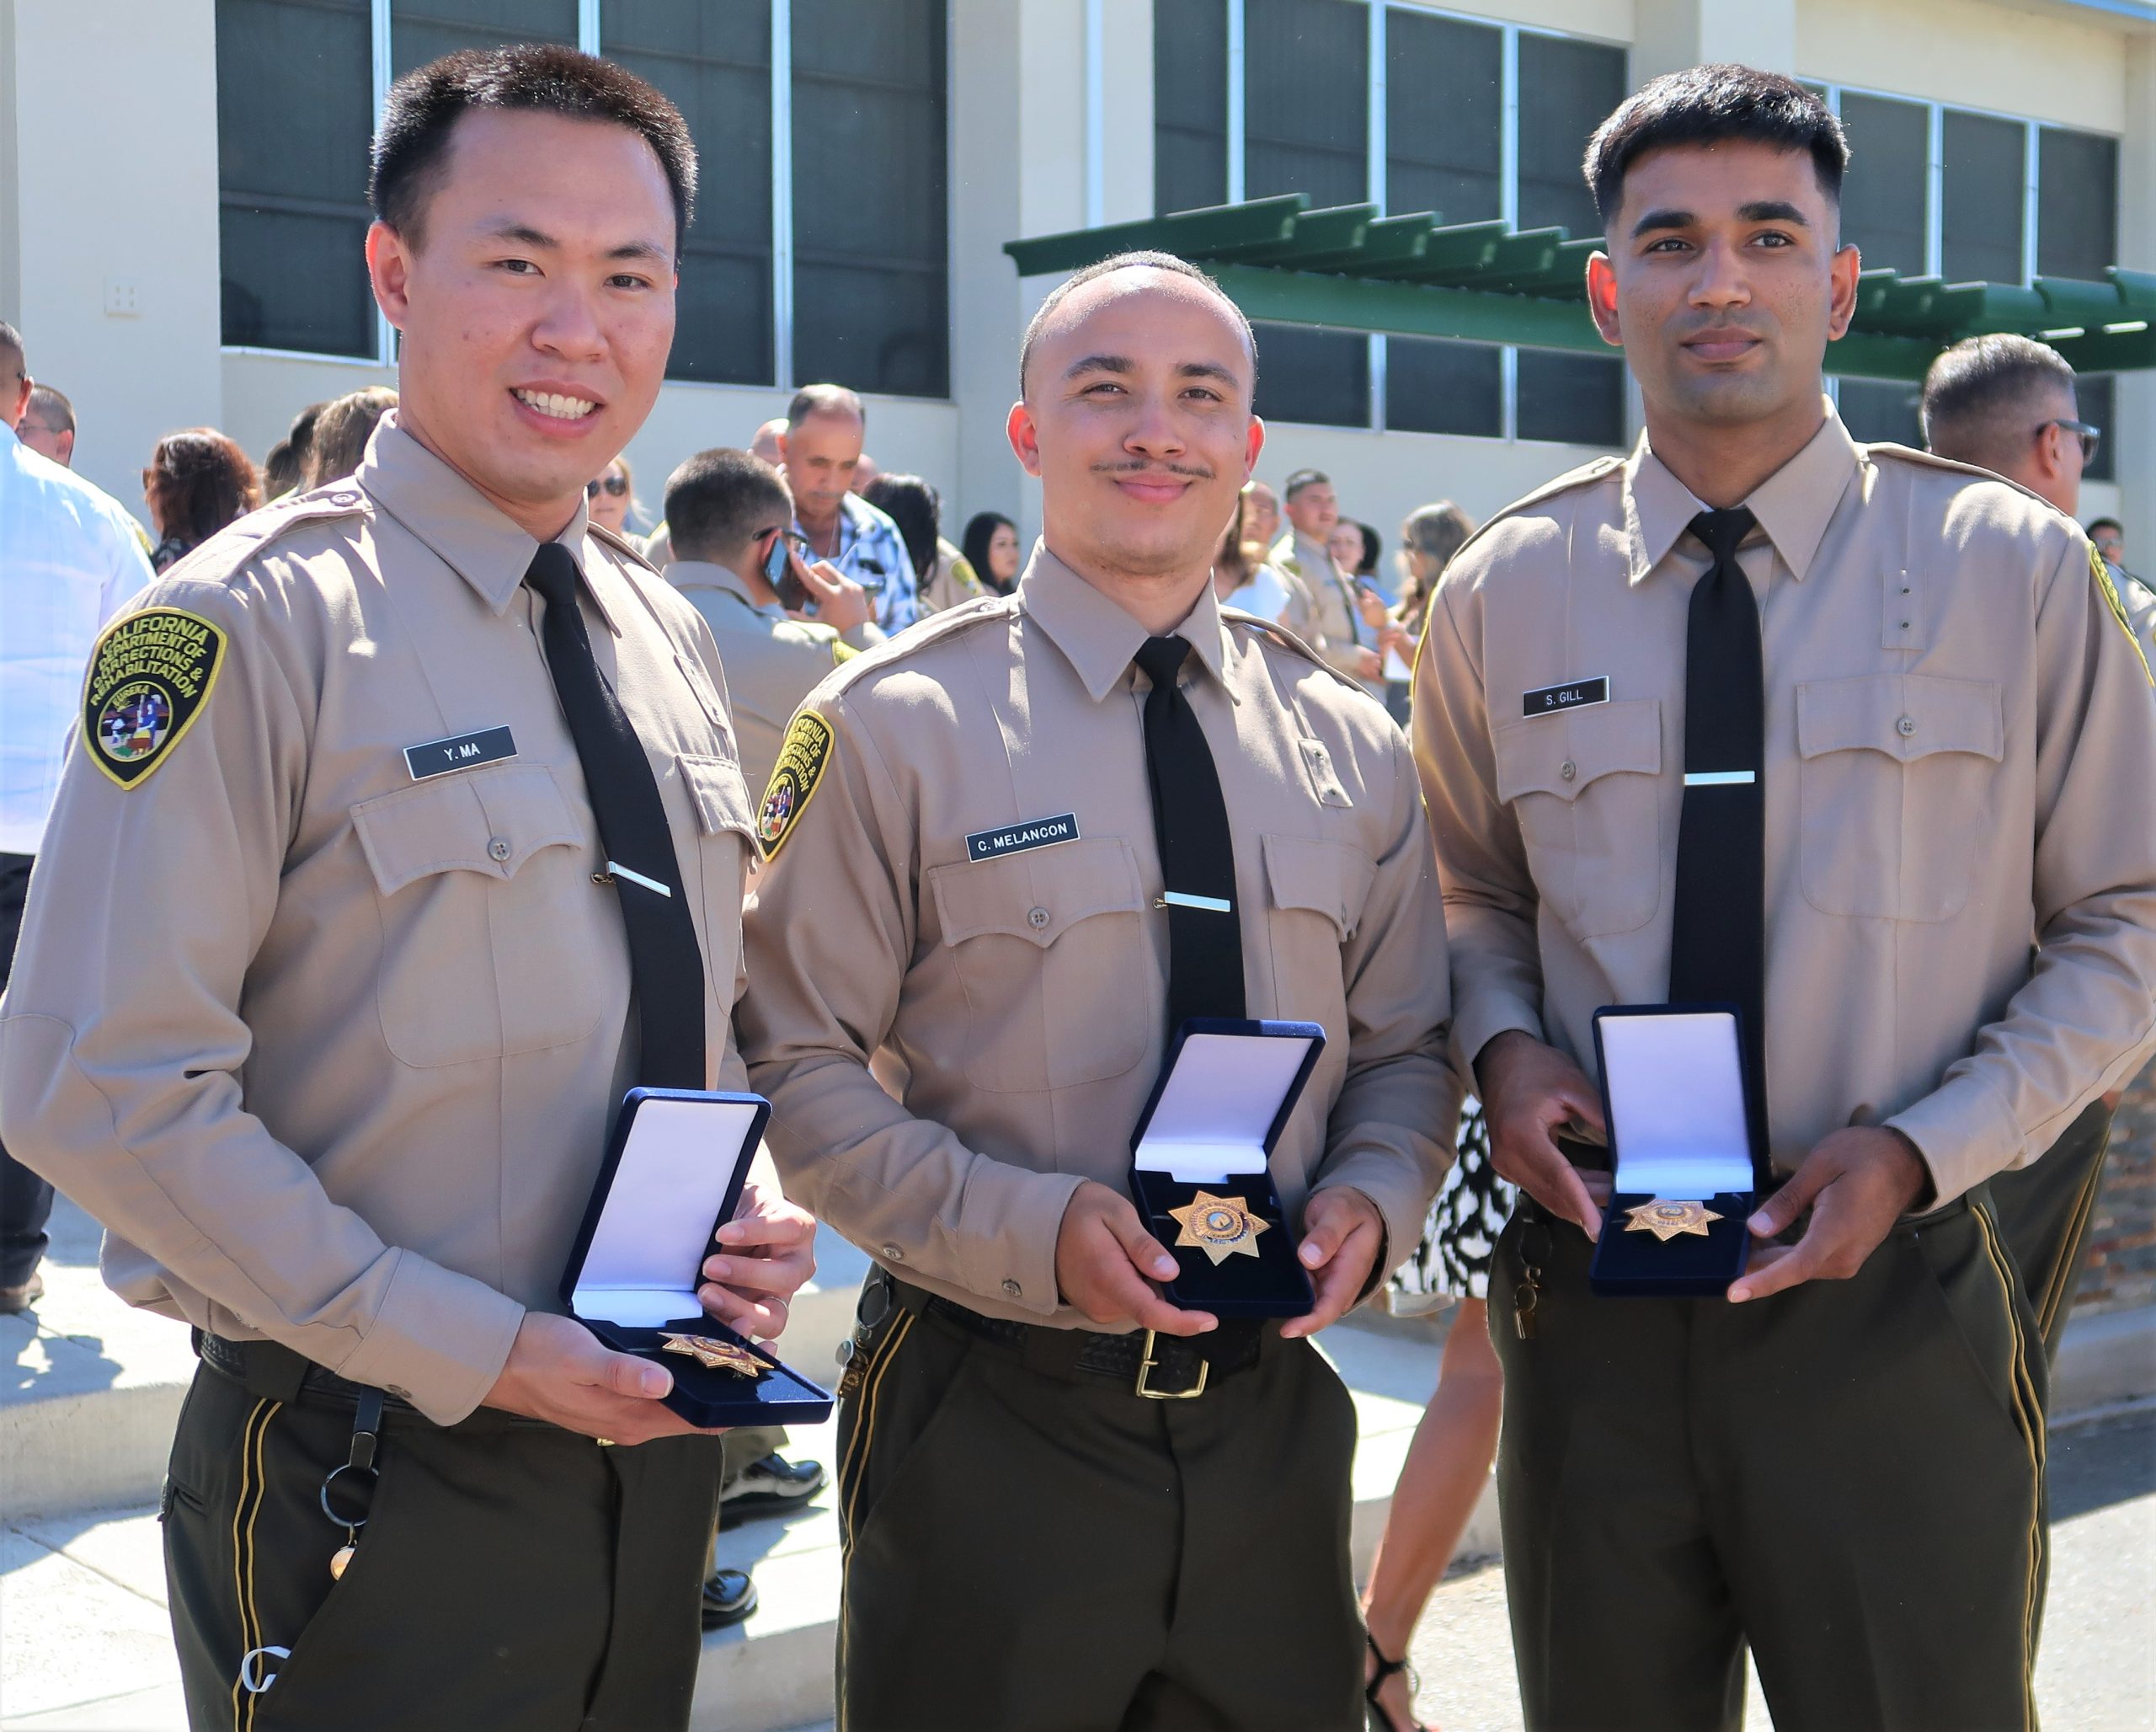 New correctional officers show their badges.